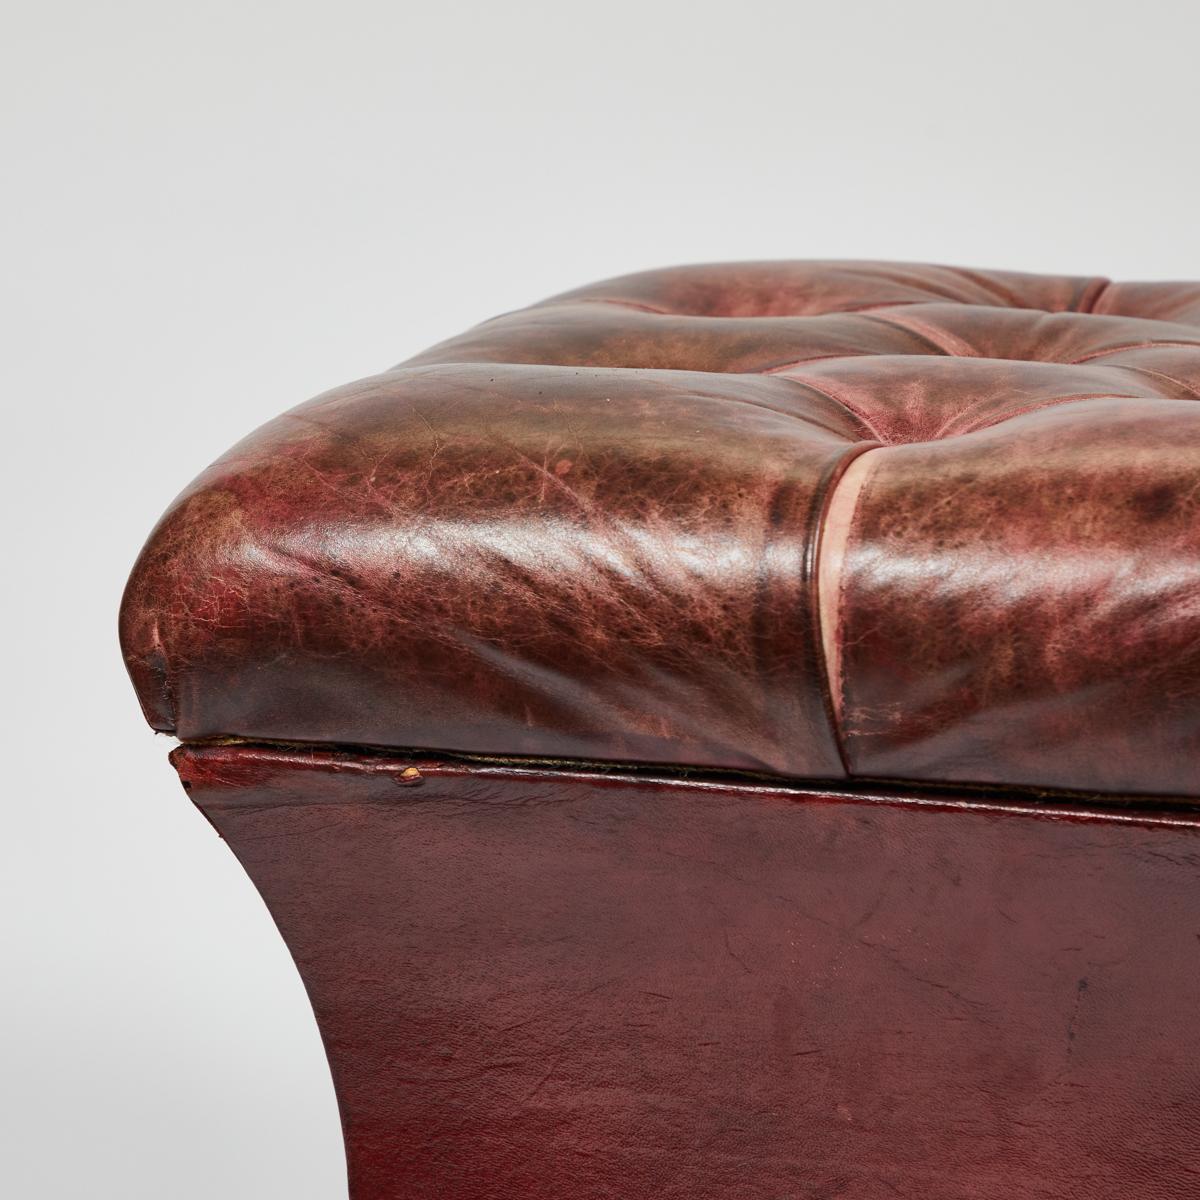 19th-century English tufted red leather ottoman with round disc feet and removable seat that lifts for storage. Handsome and discreet, this multifunctional piece has great lines and a rich, warm patina. 

England, circa 1890

Dimensions: 20W x 19D x